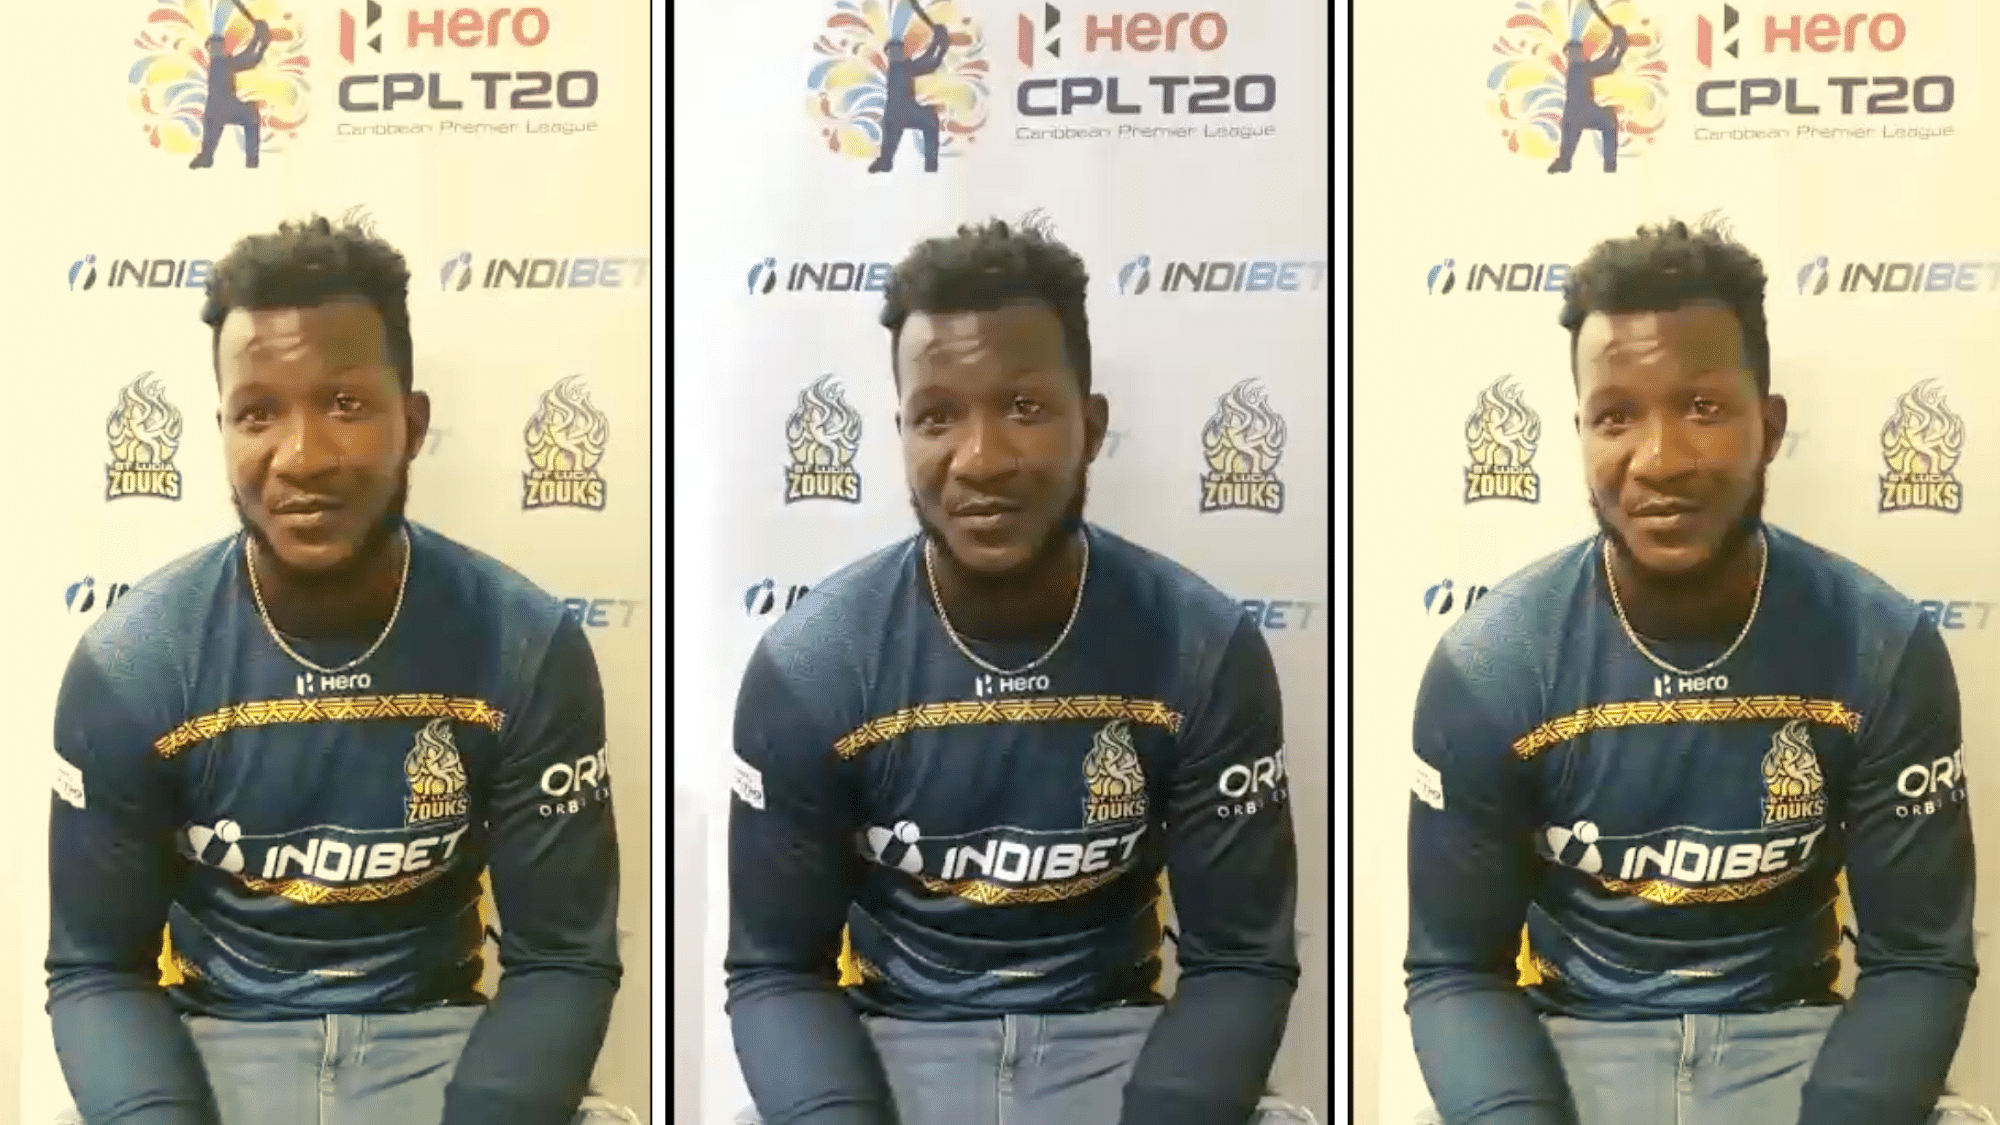 VIDEO: West Indian cricketer Daren Sammy talks about life in a bio-bubble and his revelations of racism in the IPL.